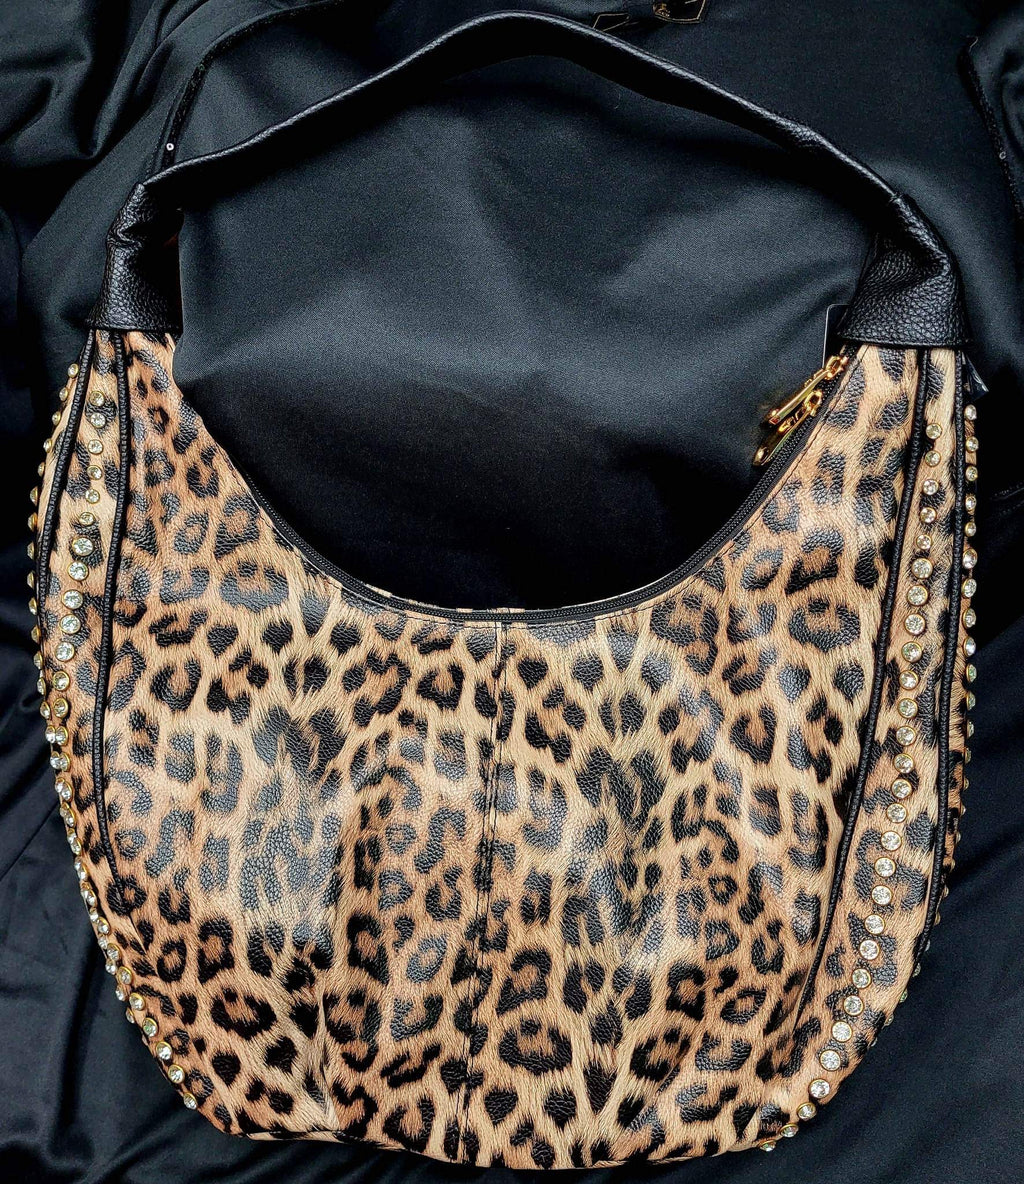 LARGE BEAUTIFUL LEOPARD PRINT HANDBAG WITH 4 ROWS OF BLING ON THE SIDES - Lil Monkey Boutique